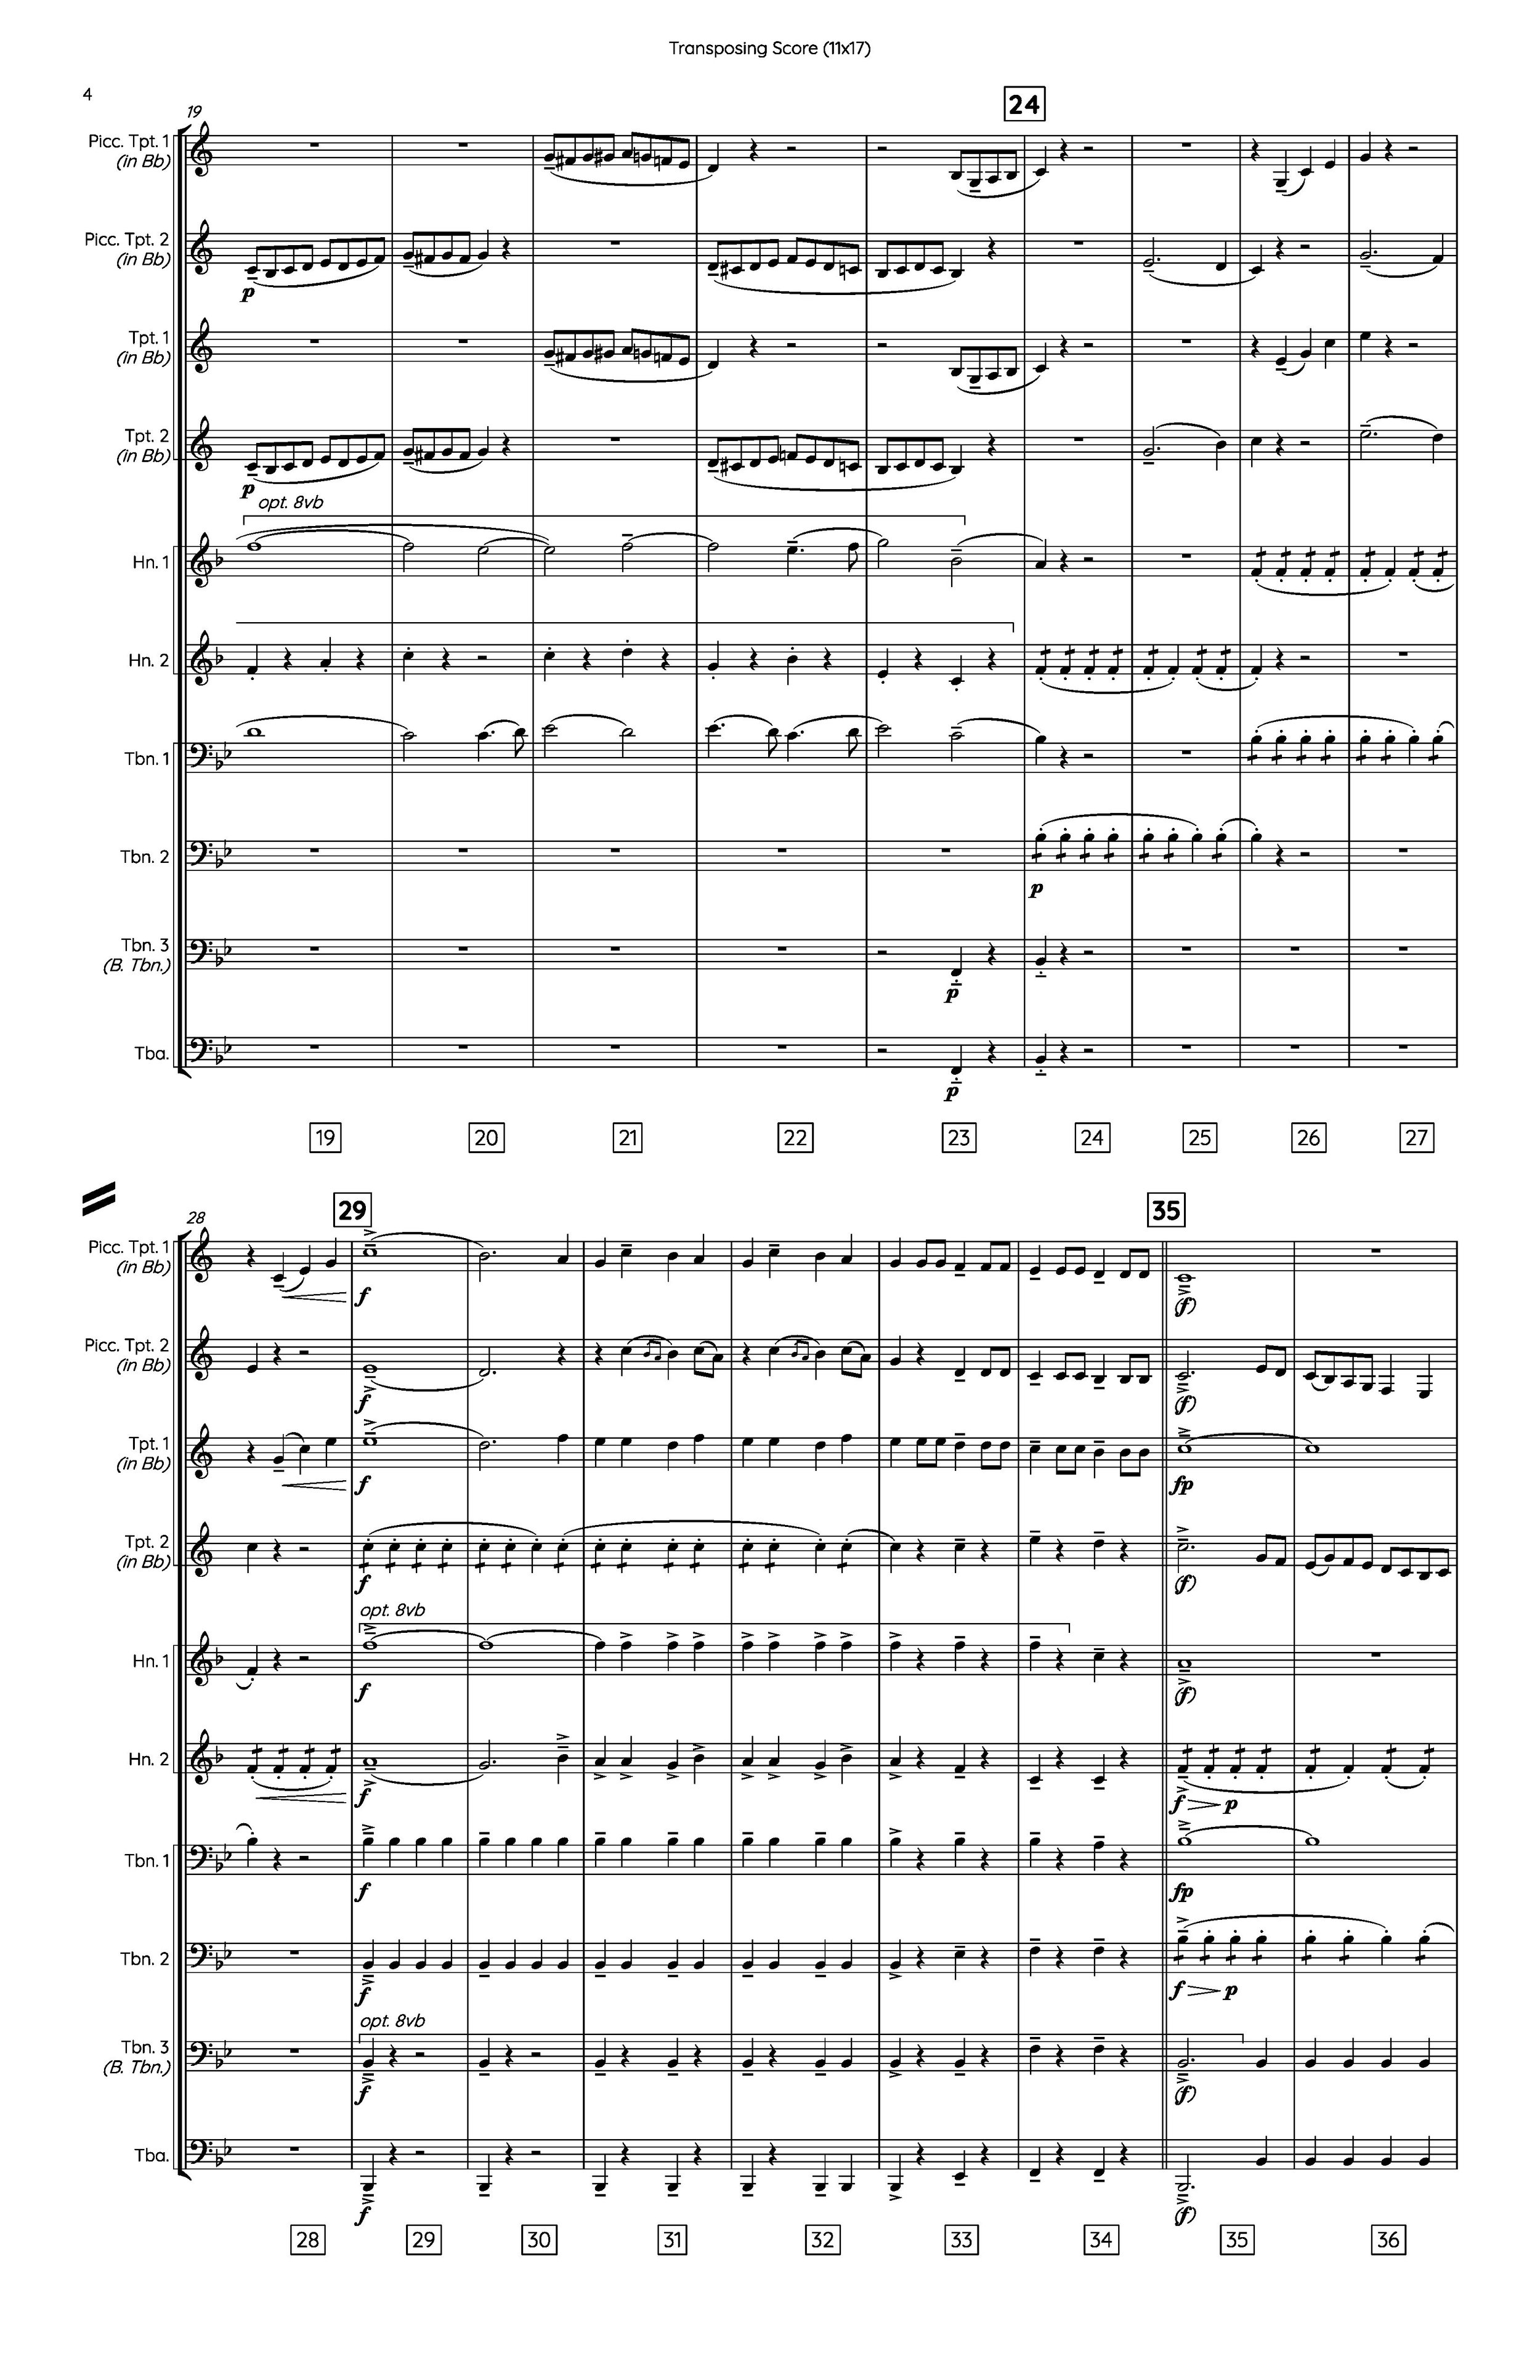 Marriage of Figaro [Brass Ensemble] in Bb - Score 11x17_Page_04.jpg